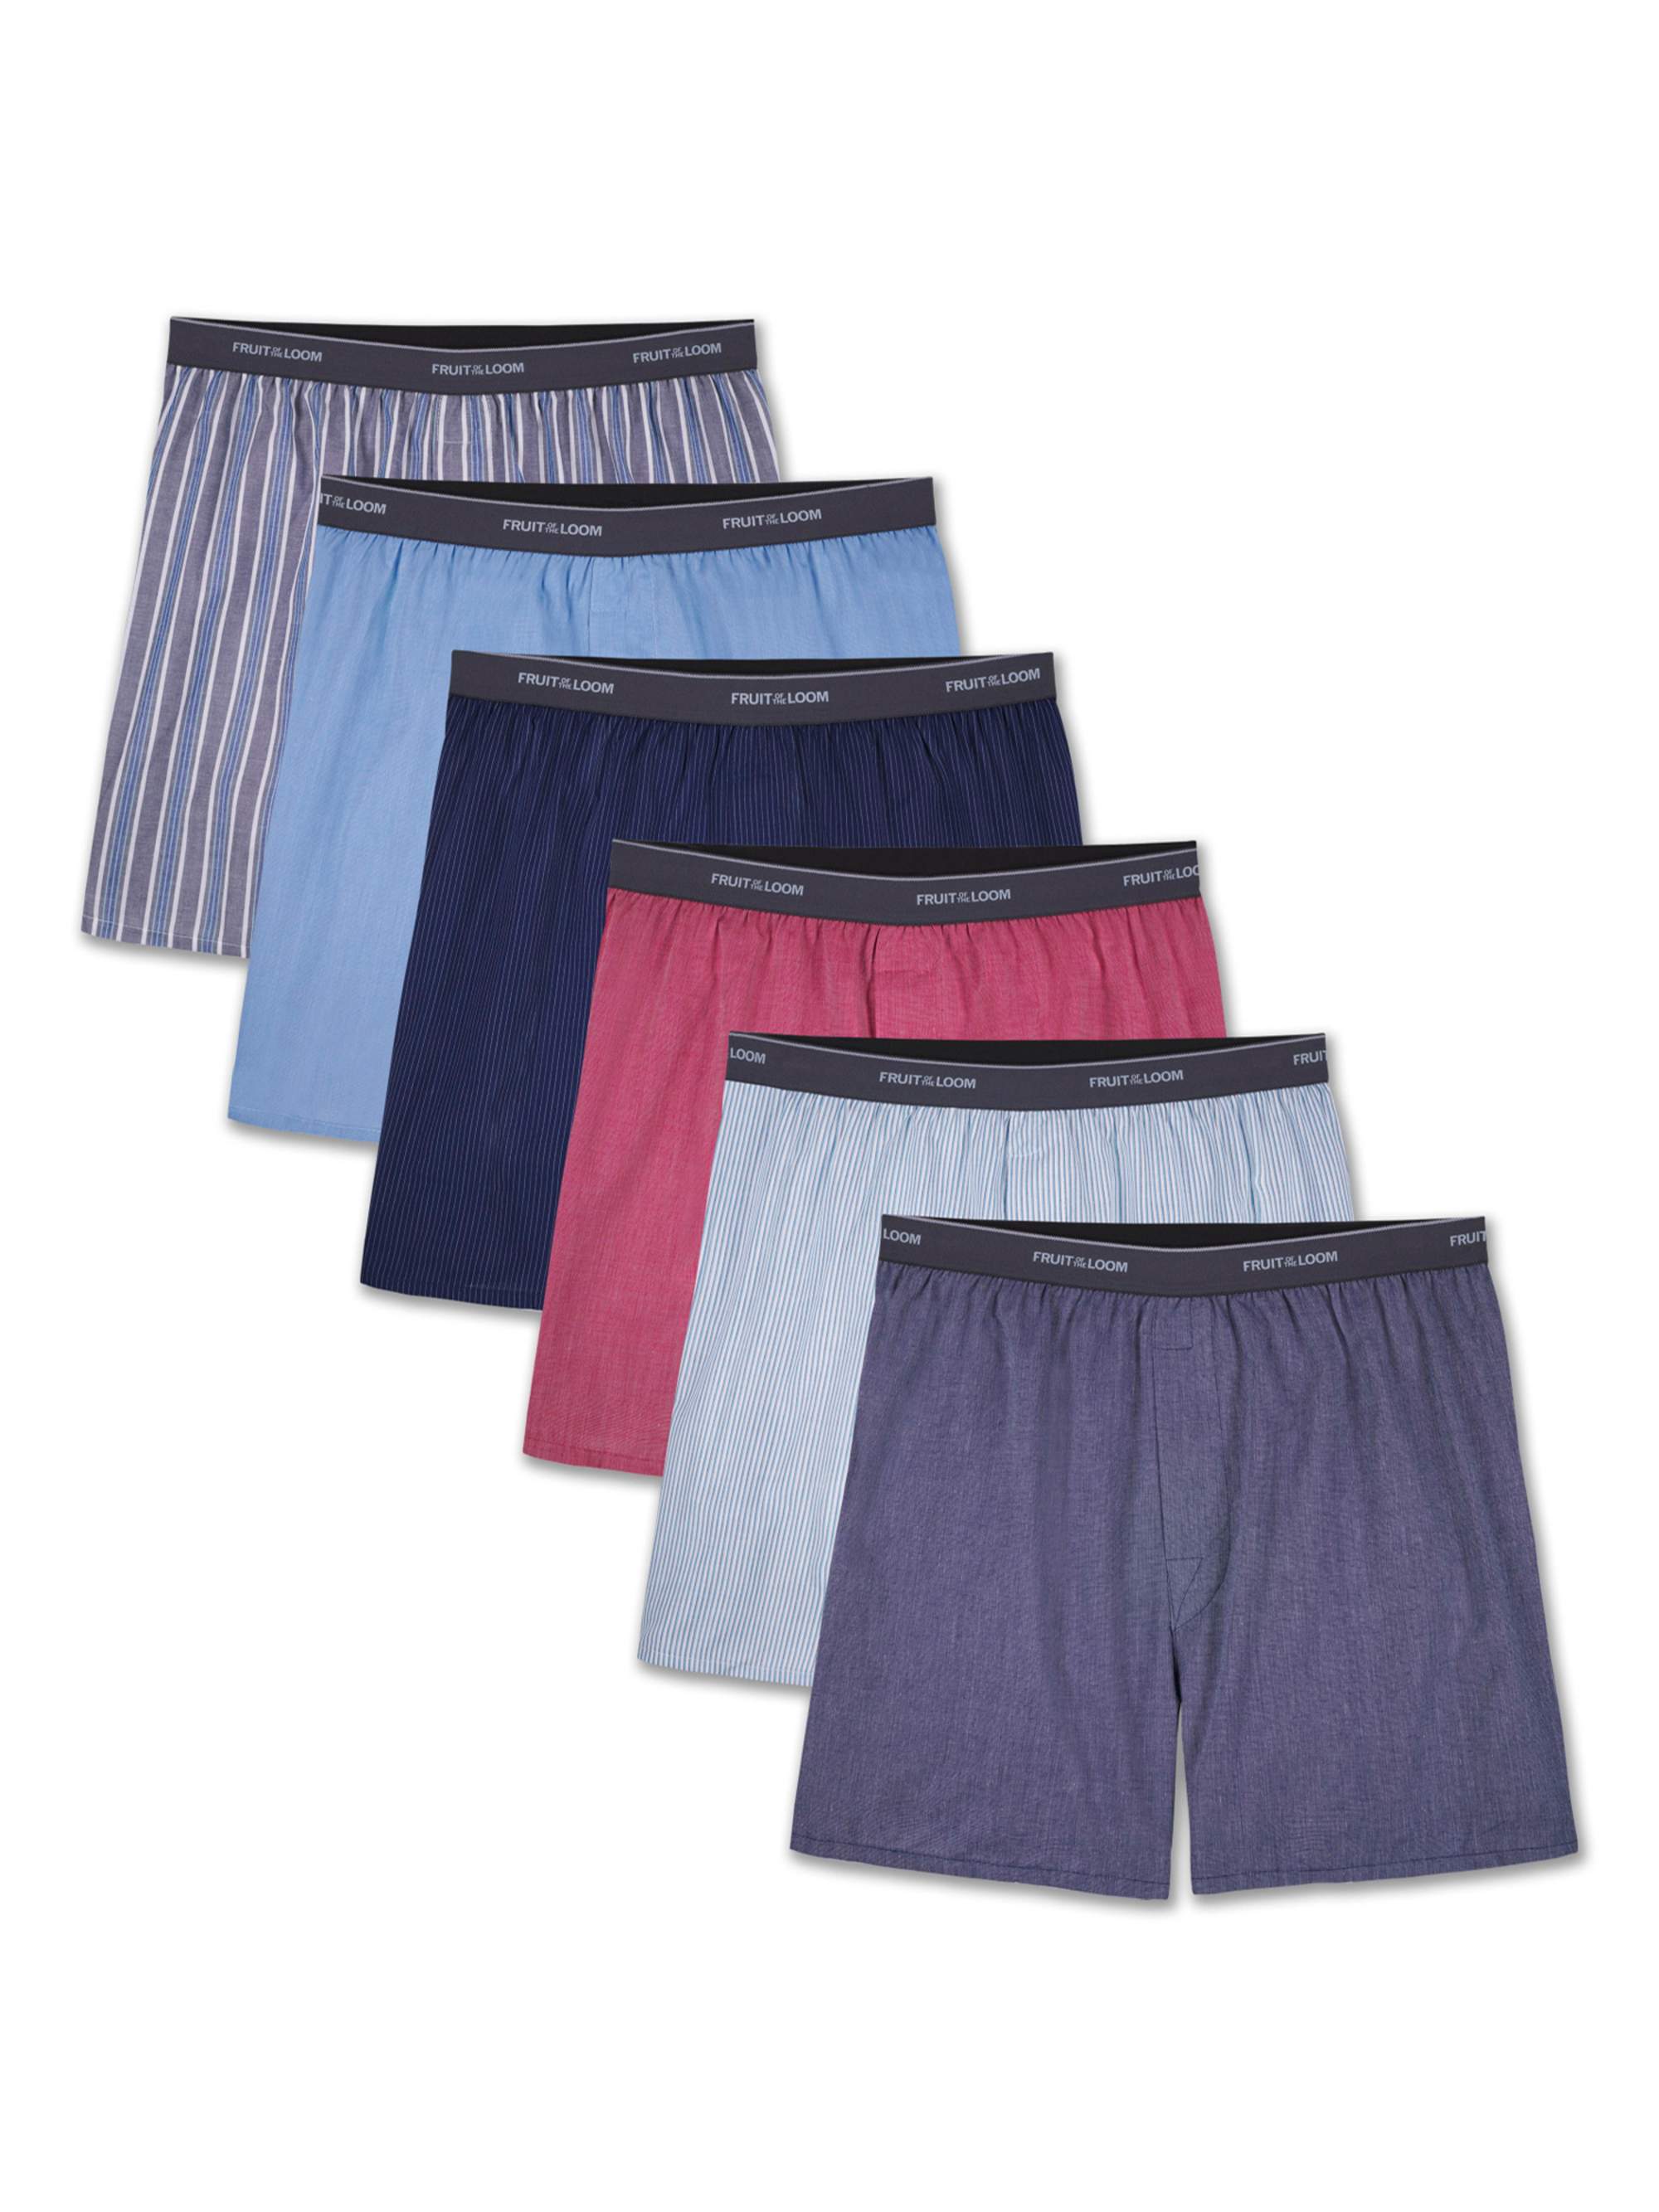 Fruit of the Loom Men's Woven Boxers, 6 Pack - image 1 of 6